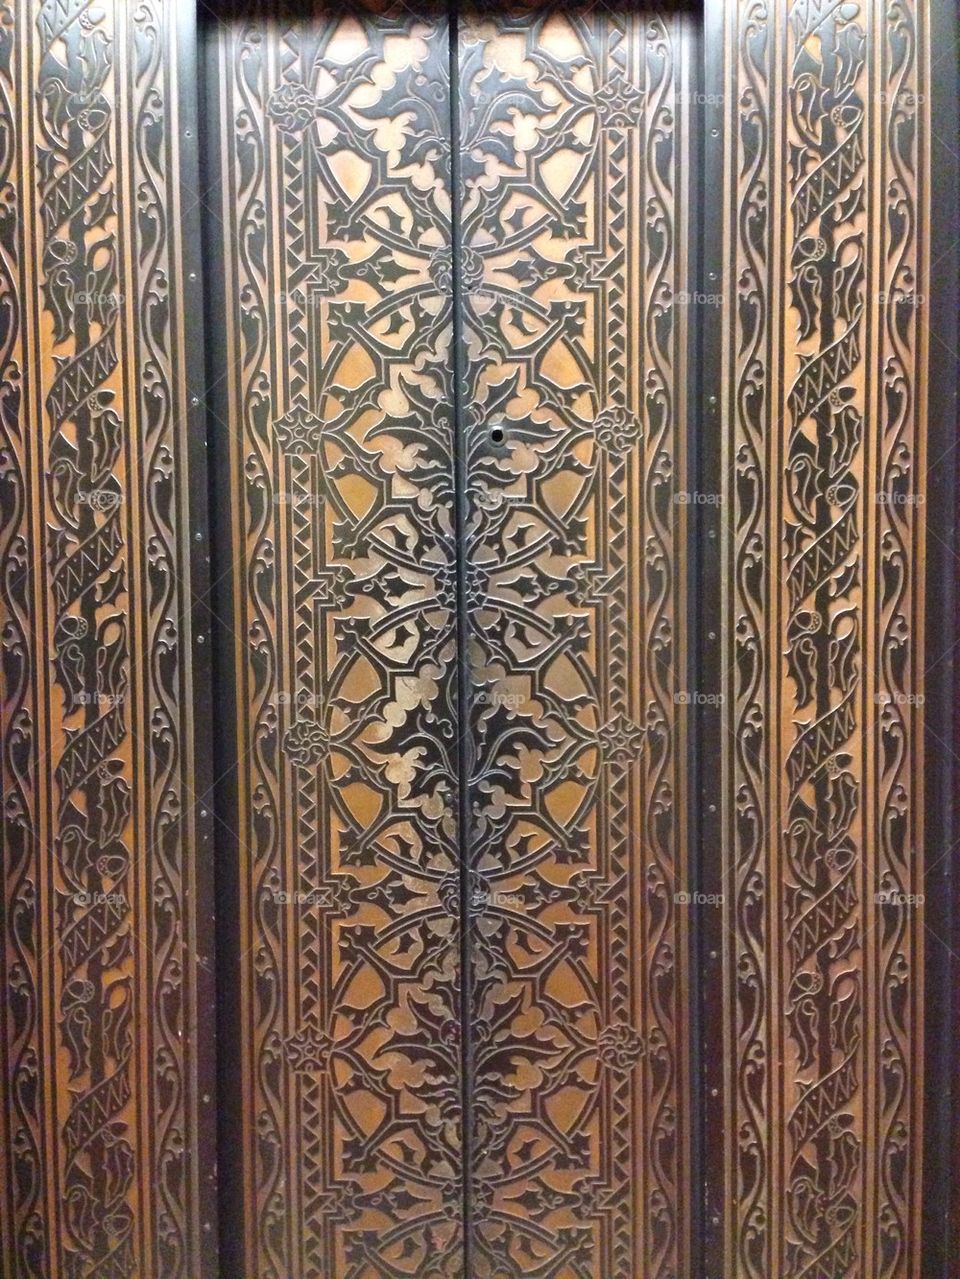 Texture detail on elevators of Woolworth Building.